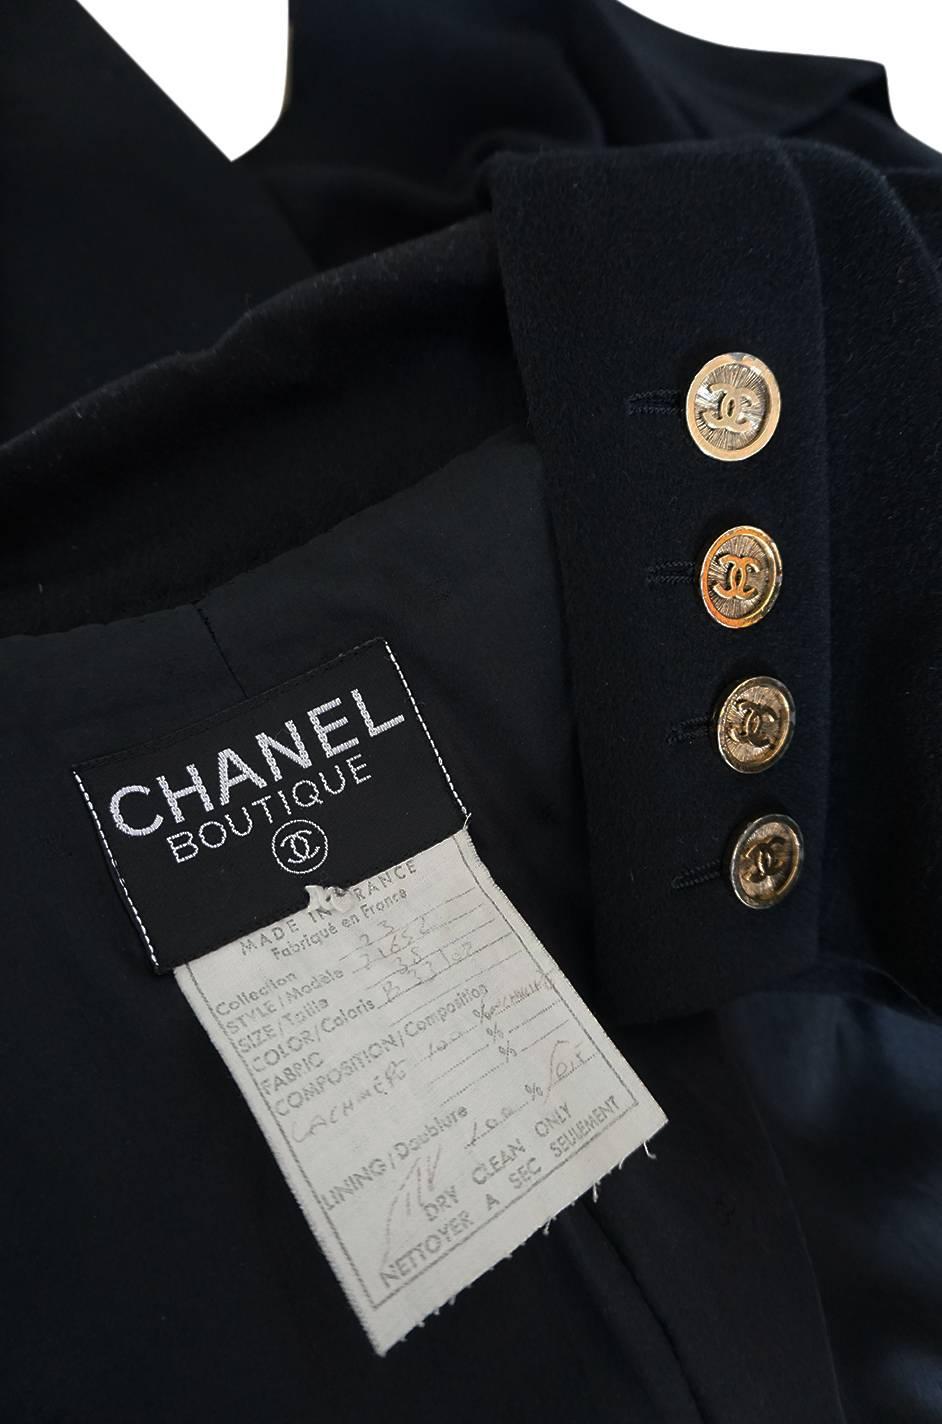 1980s Chanel Cashmere w 14 Chanel Gold Buttons Jacket 1